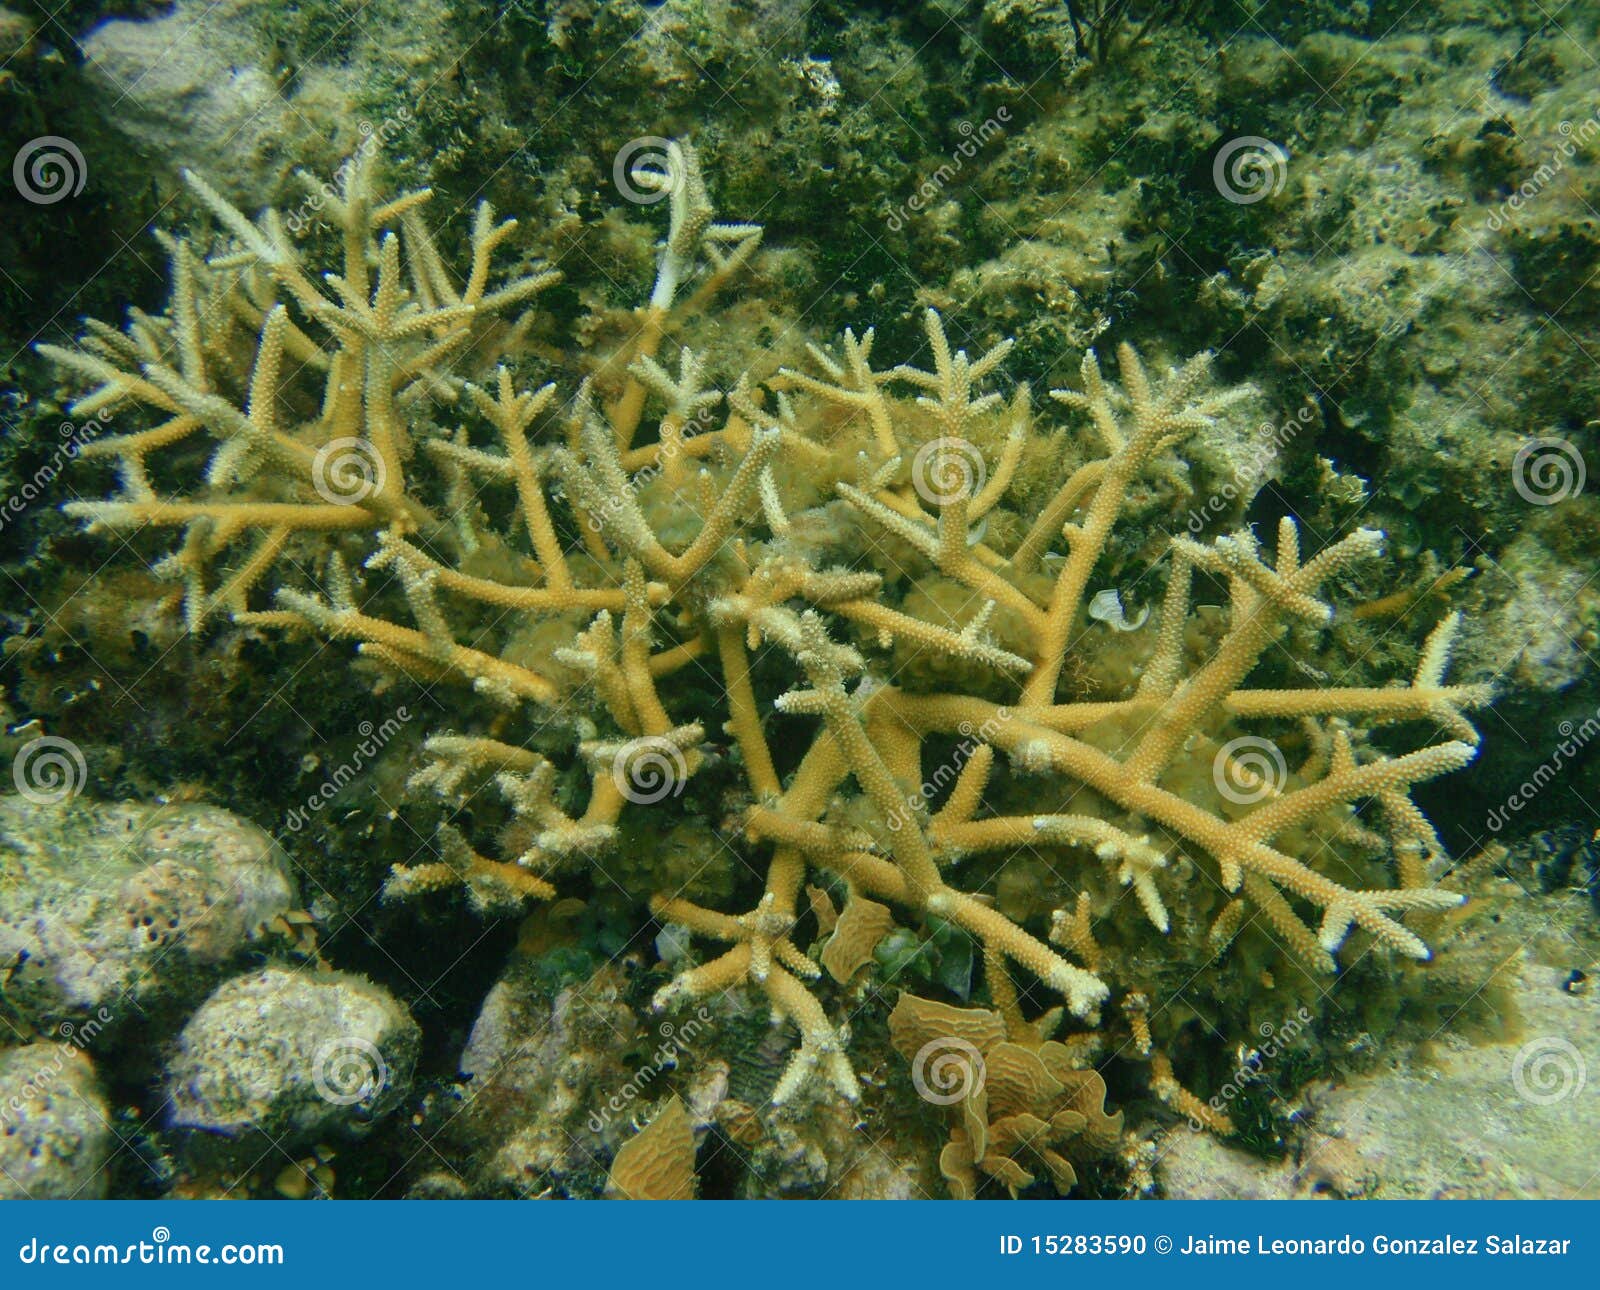 staghorn coral i